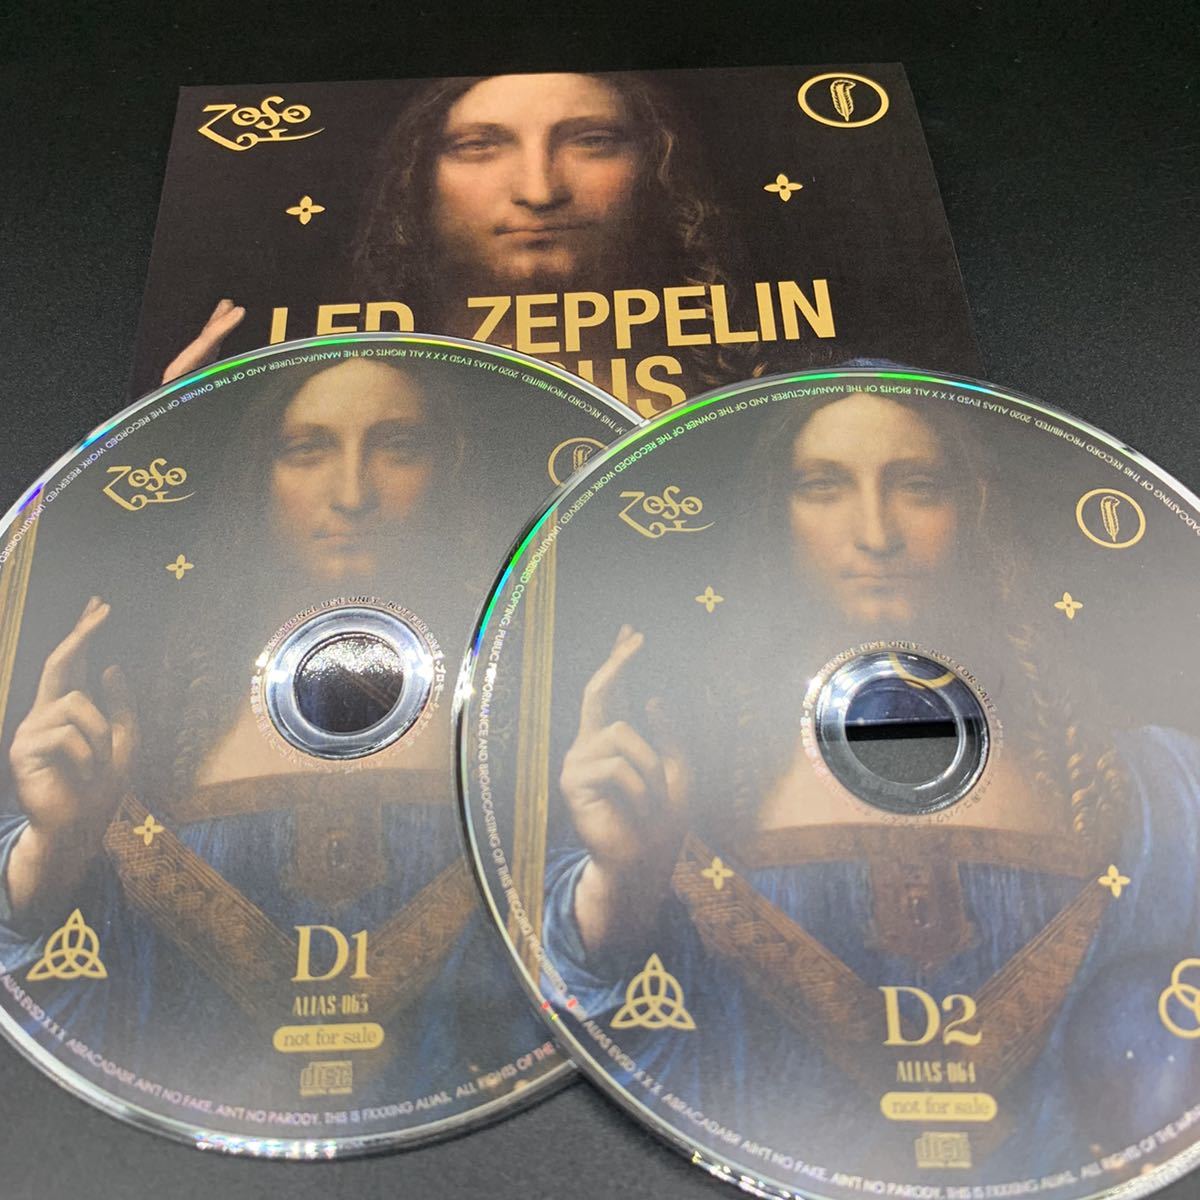 LED ZEPPELIN : JESUS 「ジュデアのジェズス」 2CD 工場プレス銀盤CD 1970 MONTREUX 限定盤！の画像5